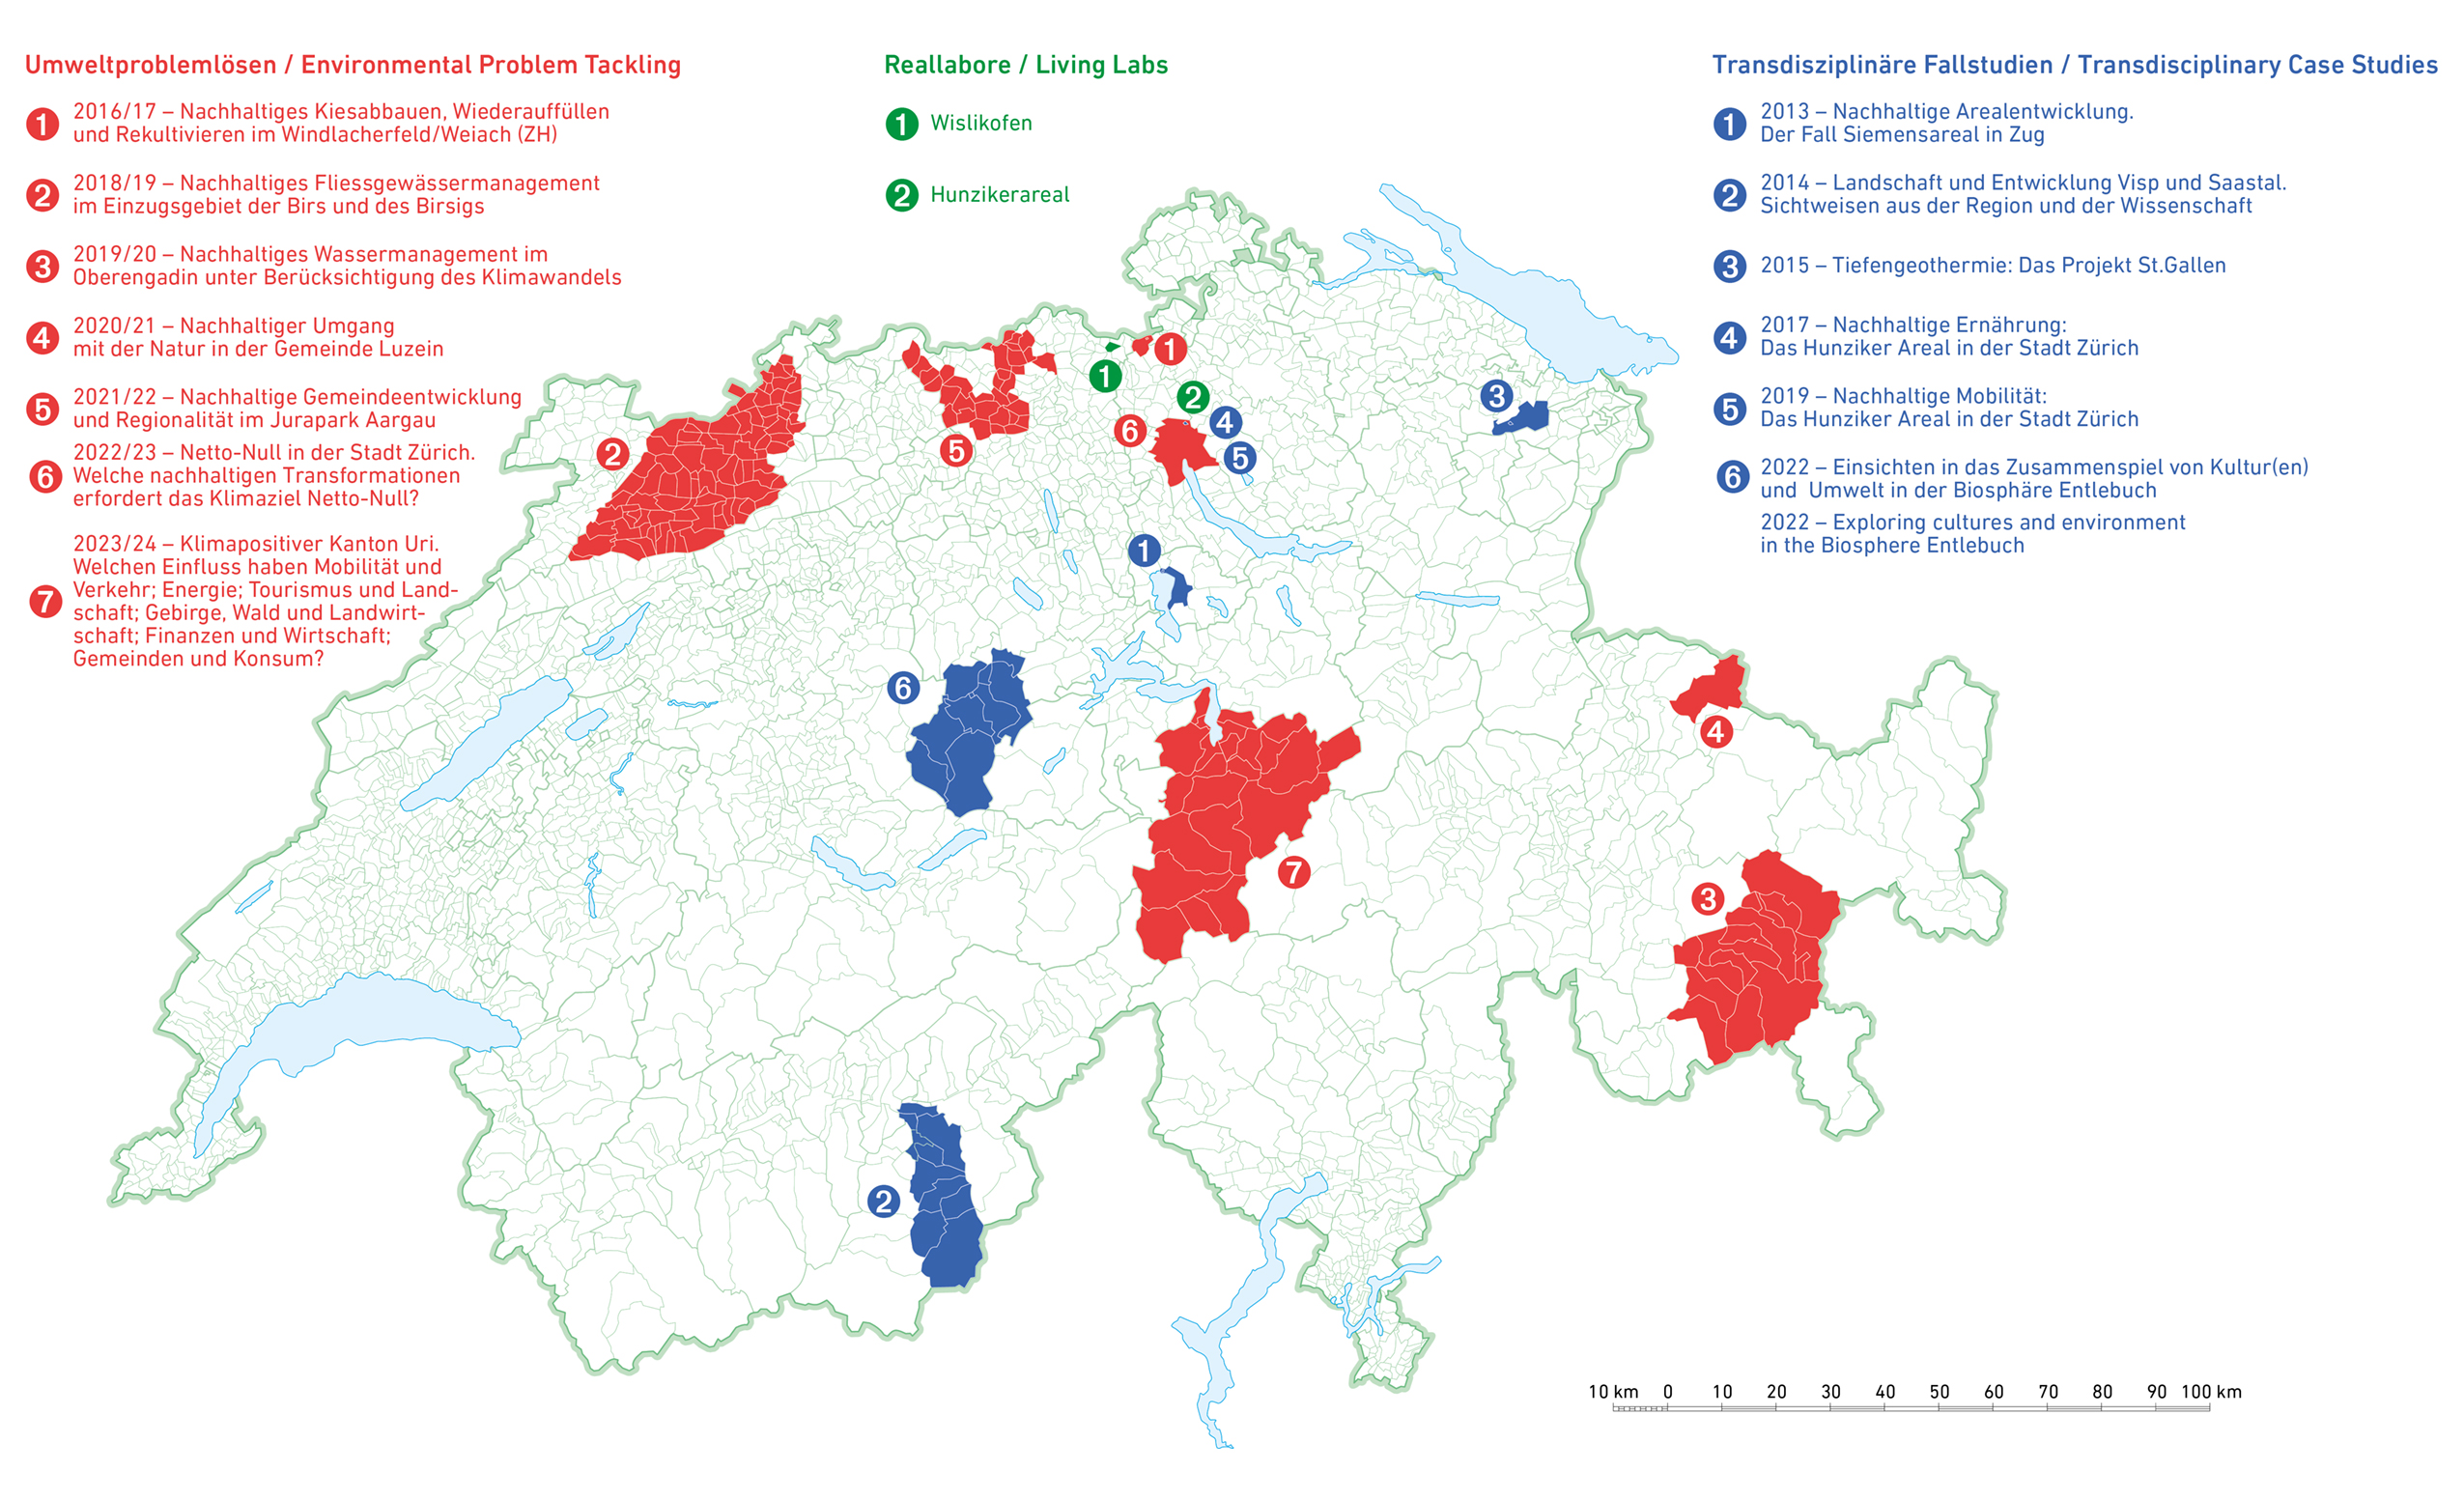 Enlarged view: Map of td locations in Switzerland